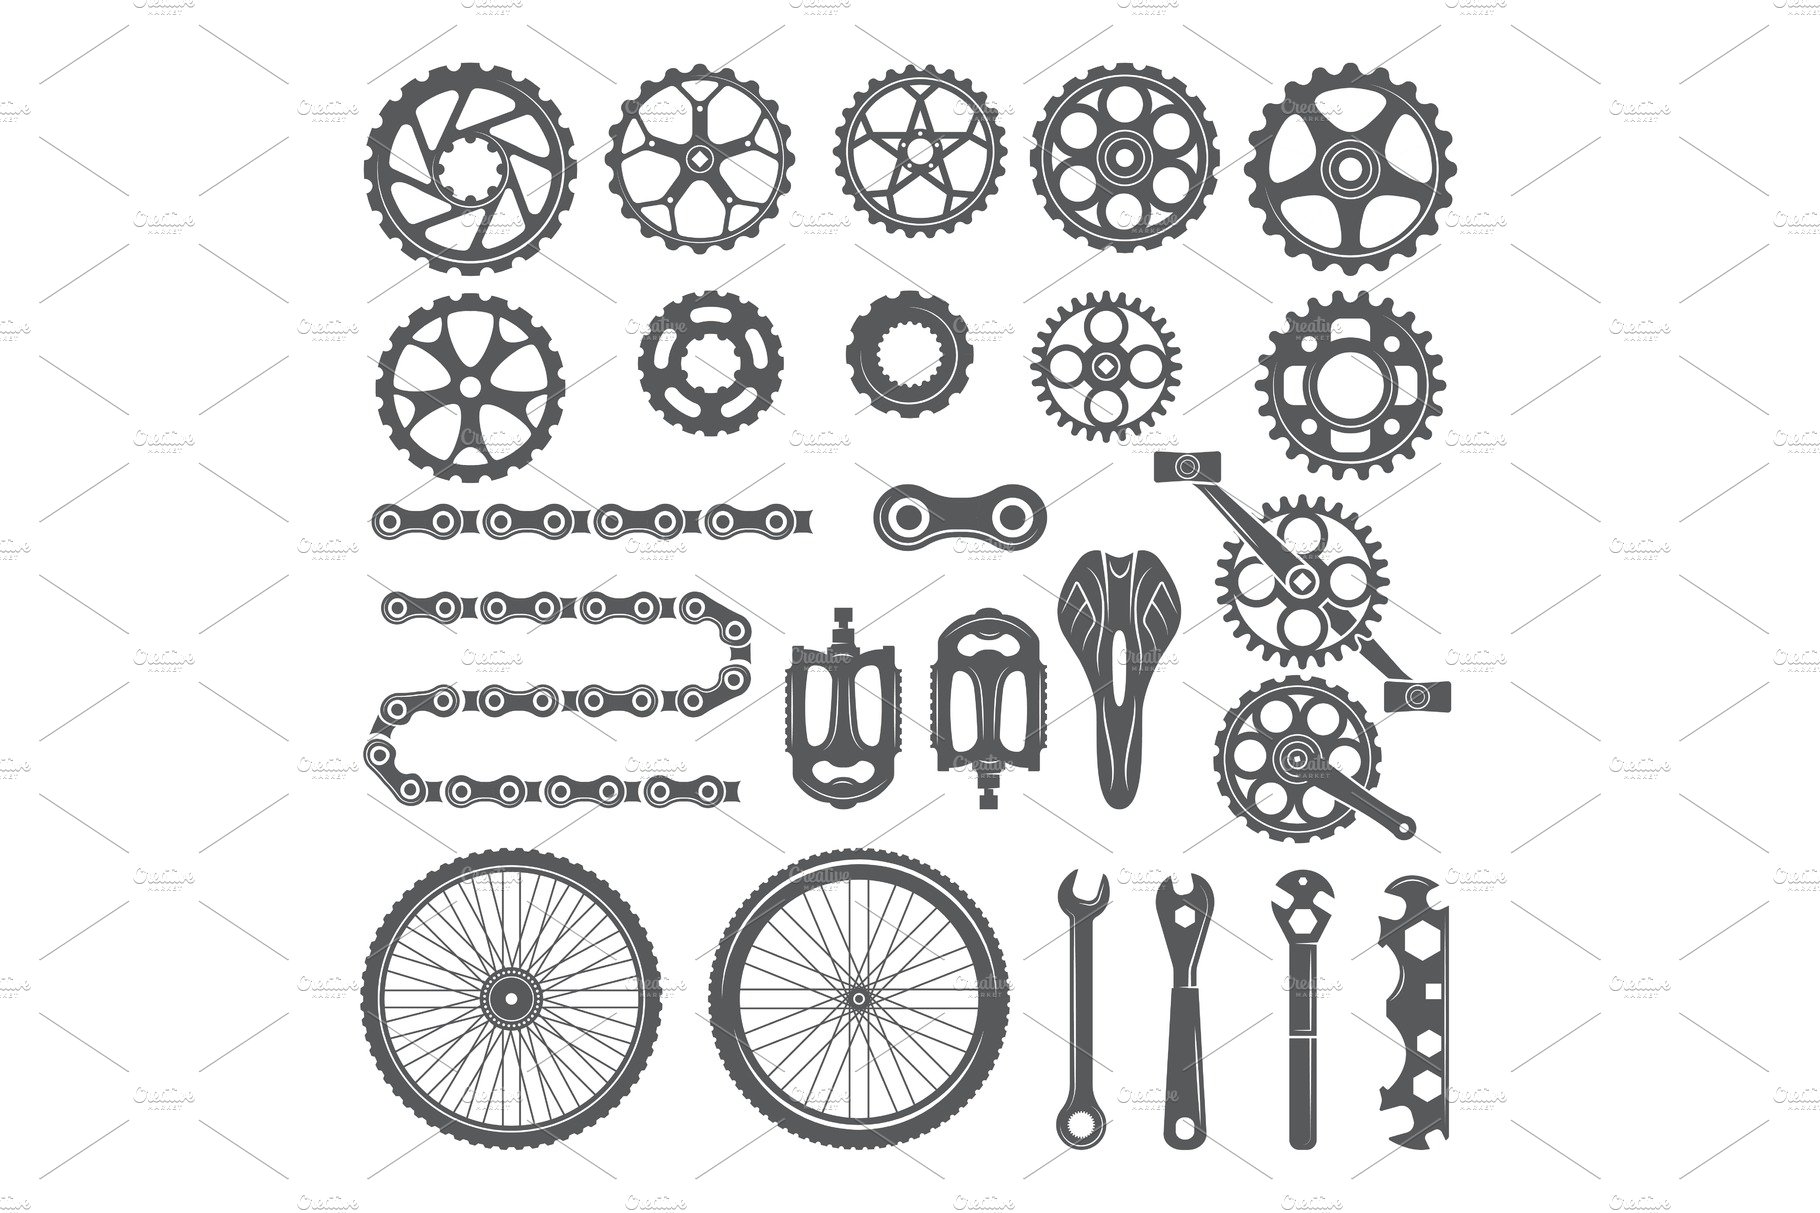 Gears, chains, wheels and other different parts of bicycle cover image.